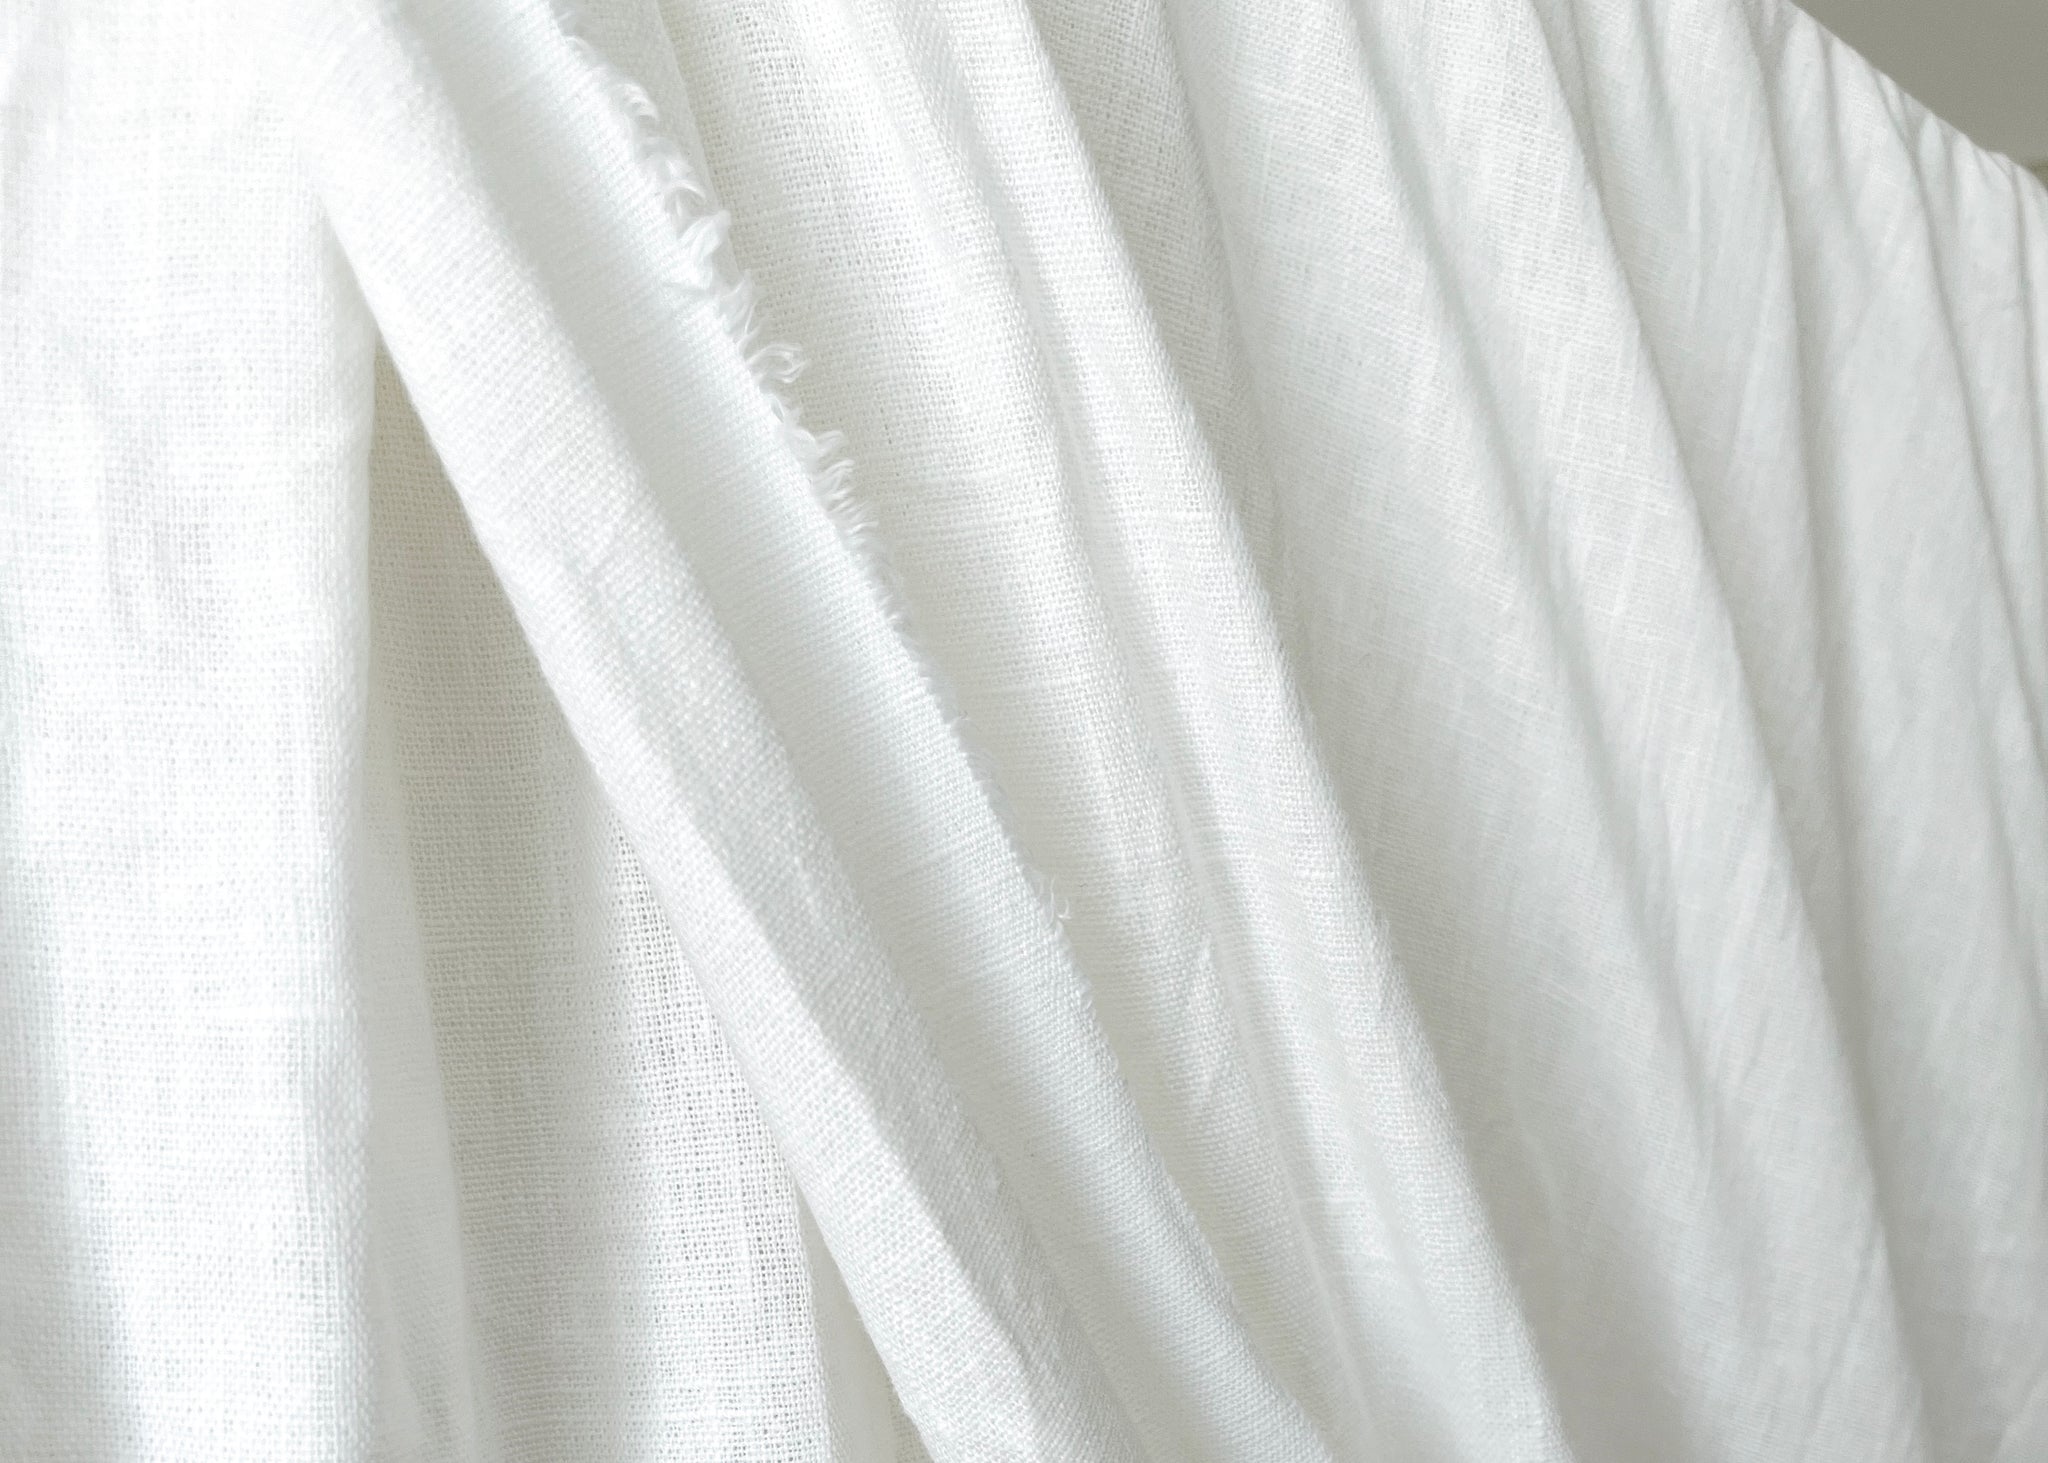 Linen is one of the oldest textile sorts in the world.  It's an extremely strong, lightweight fabric made from the flax plant.